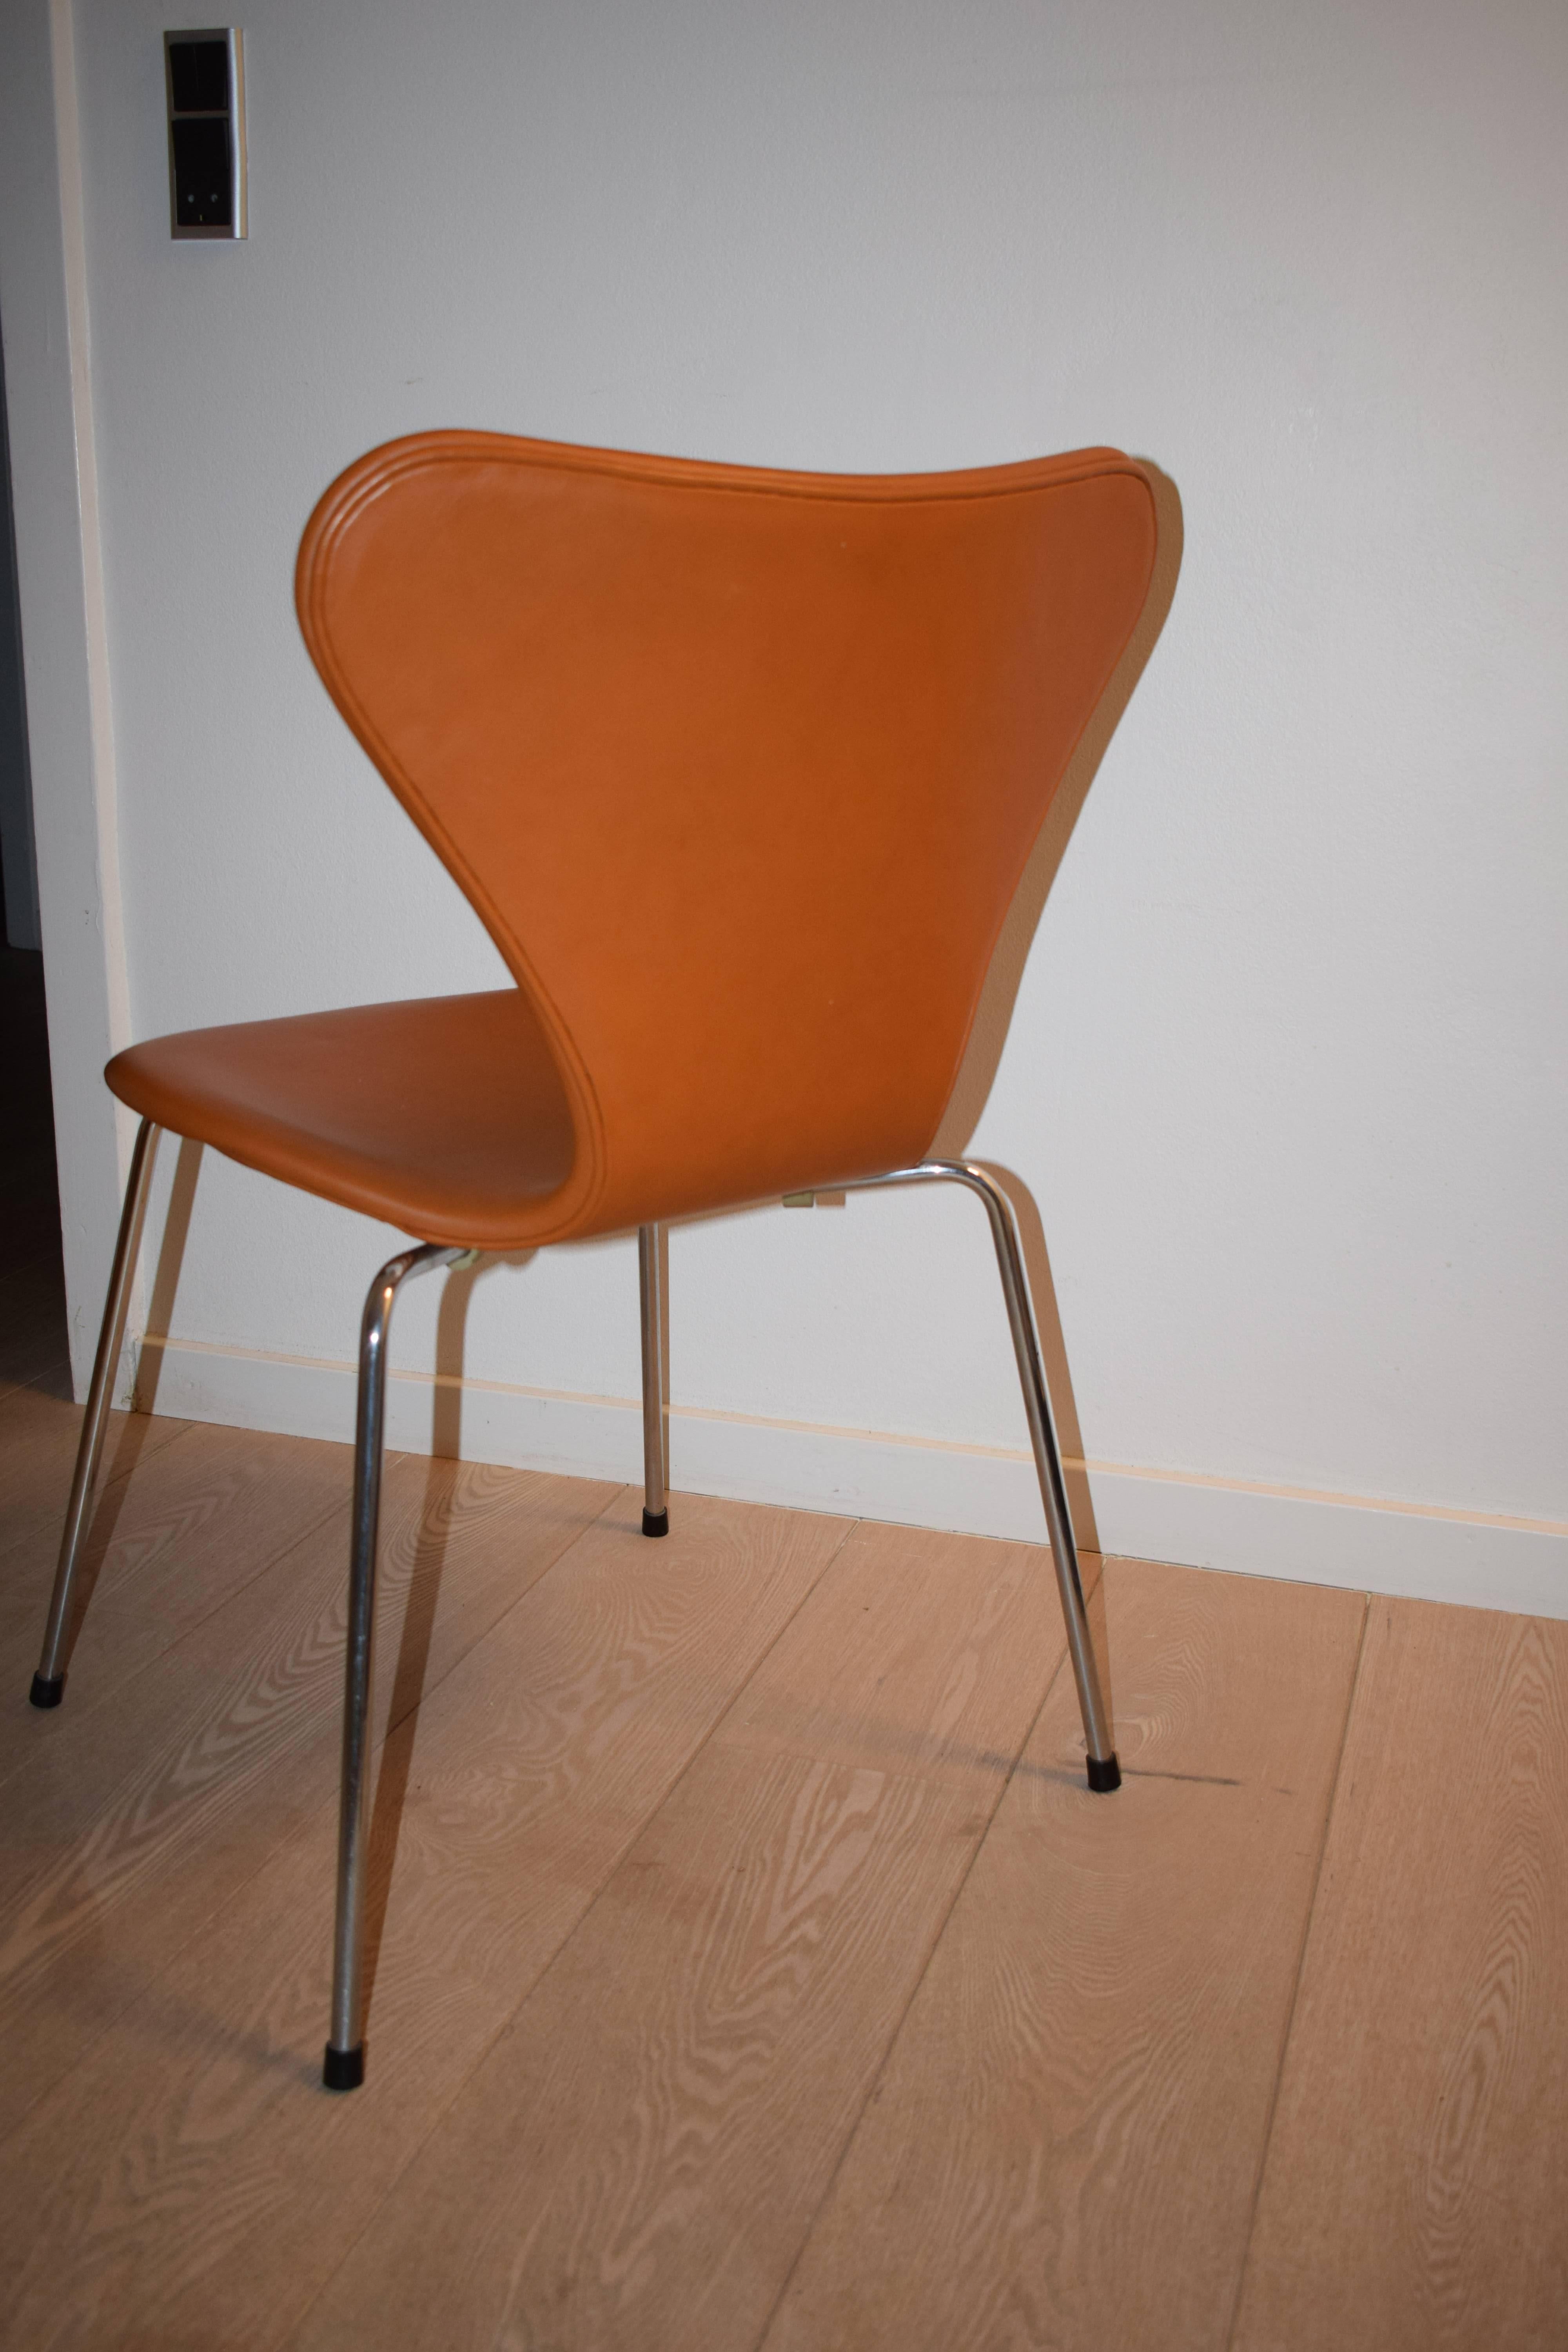 A set of six chairs, model 3107, designed by Arne Jacobsen in 1955 and manufactured by Fritz Hansen. The chairs is upholstered in Classic cognac colored leather.